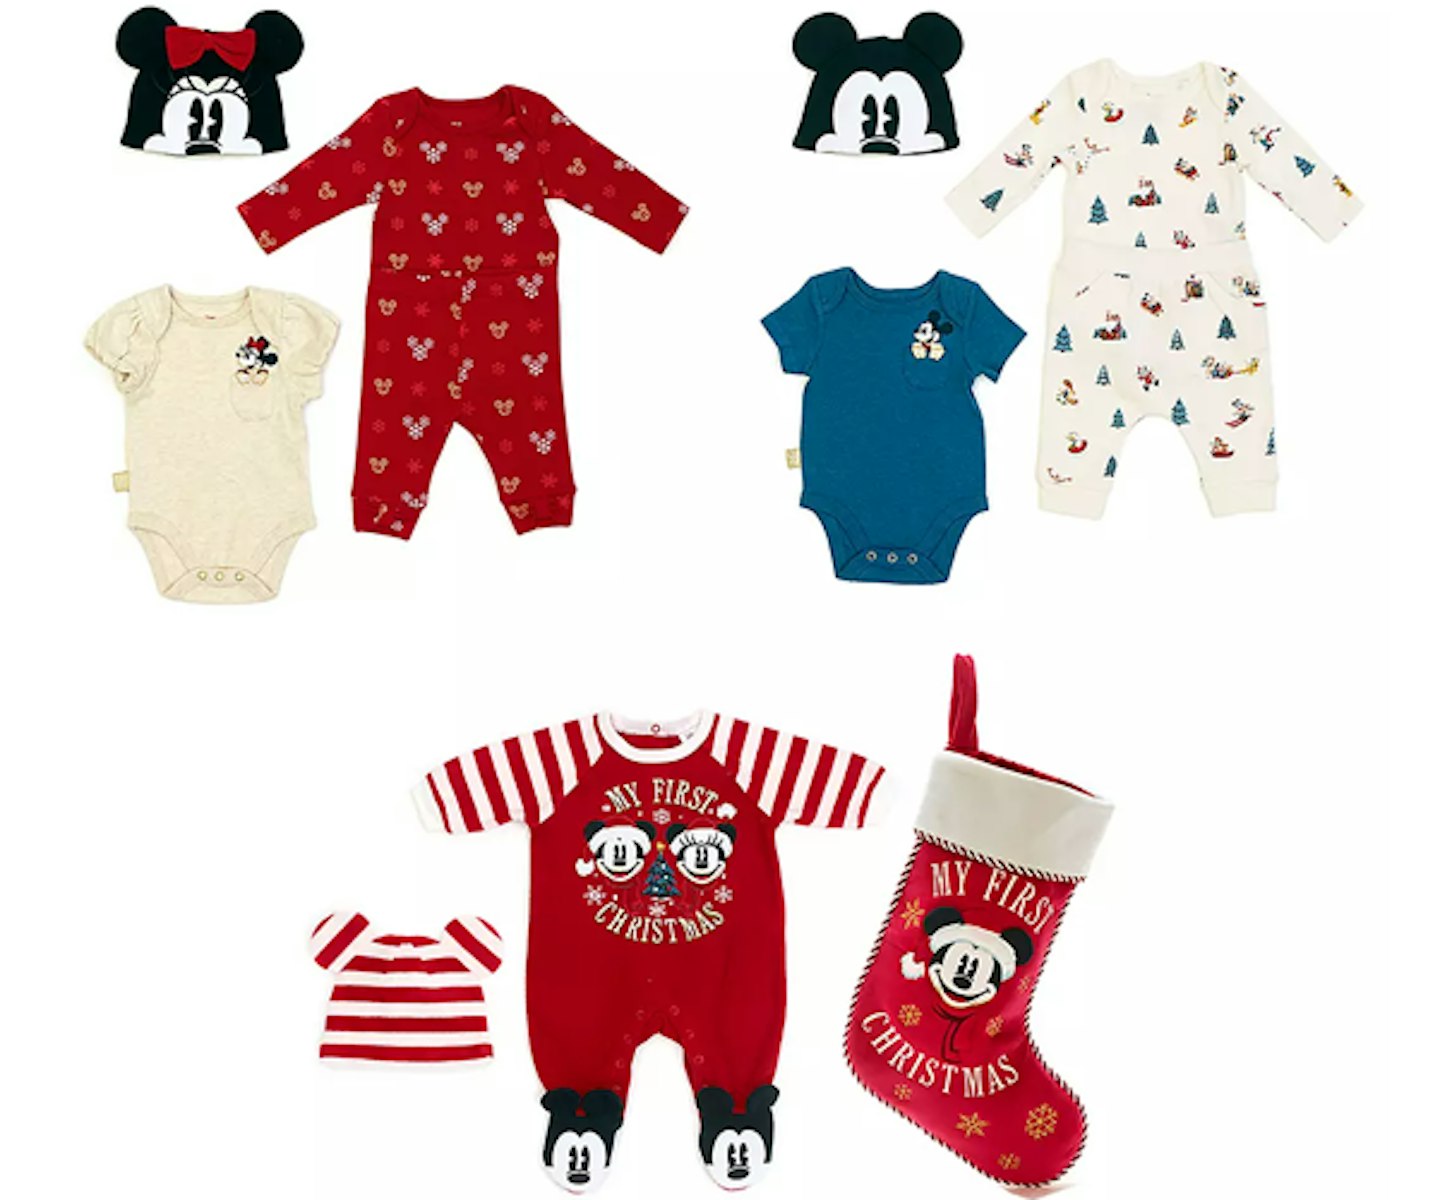 Disney Store Baby's First Christmas 2021 Collection